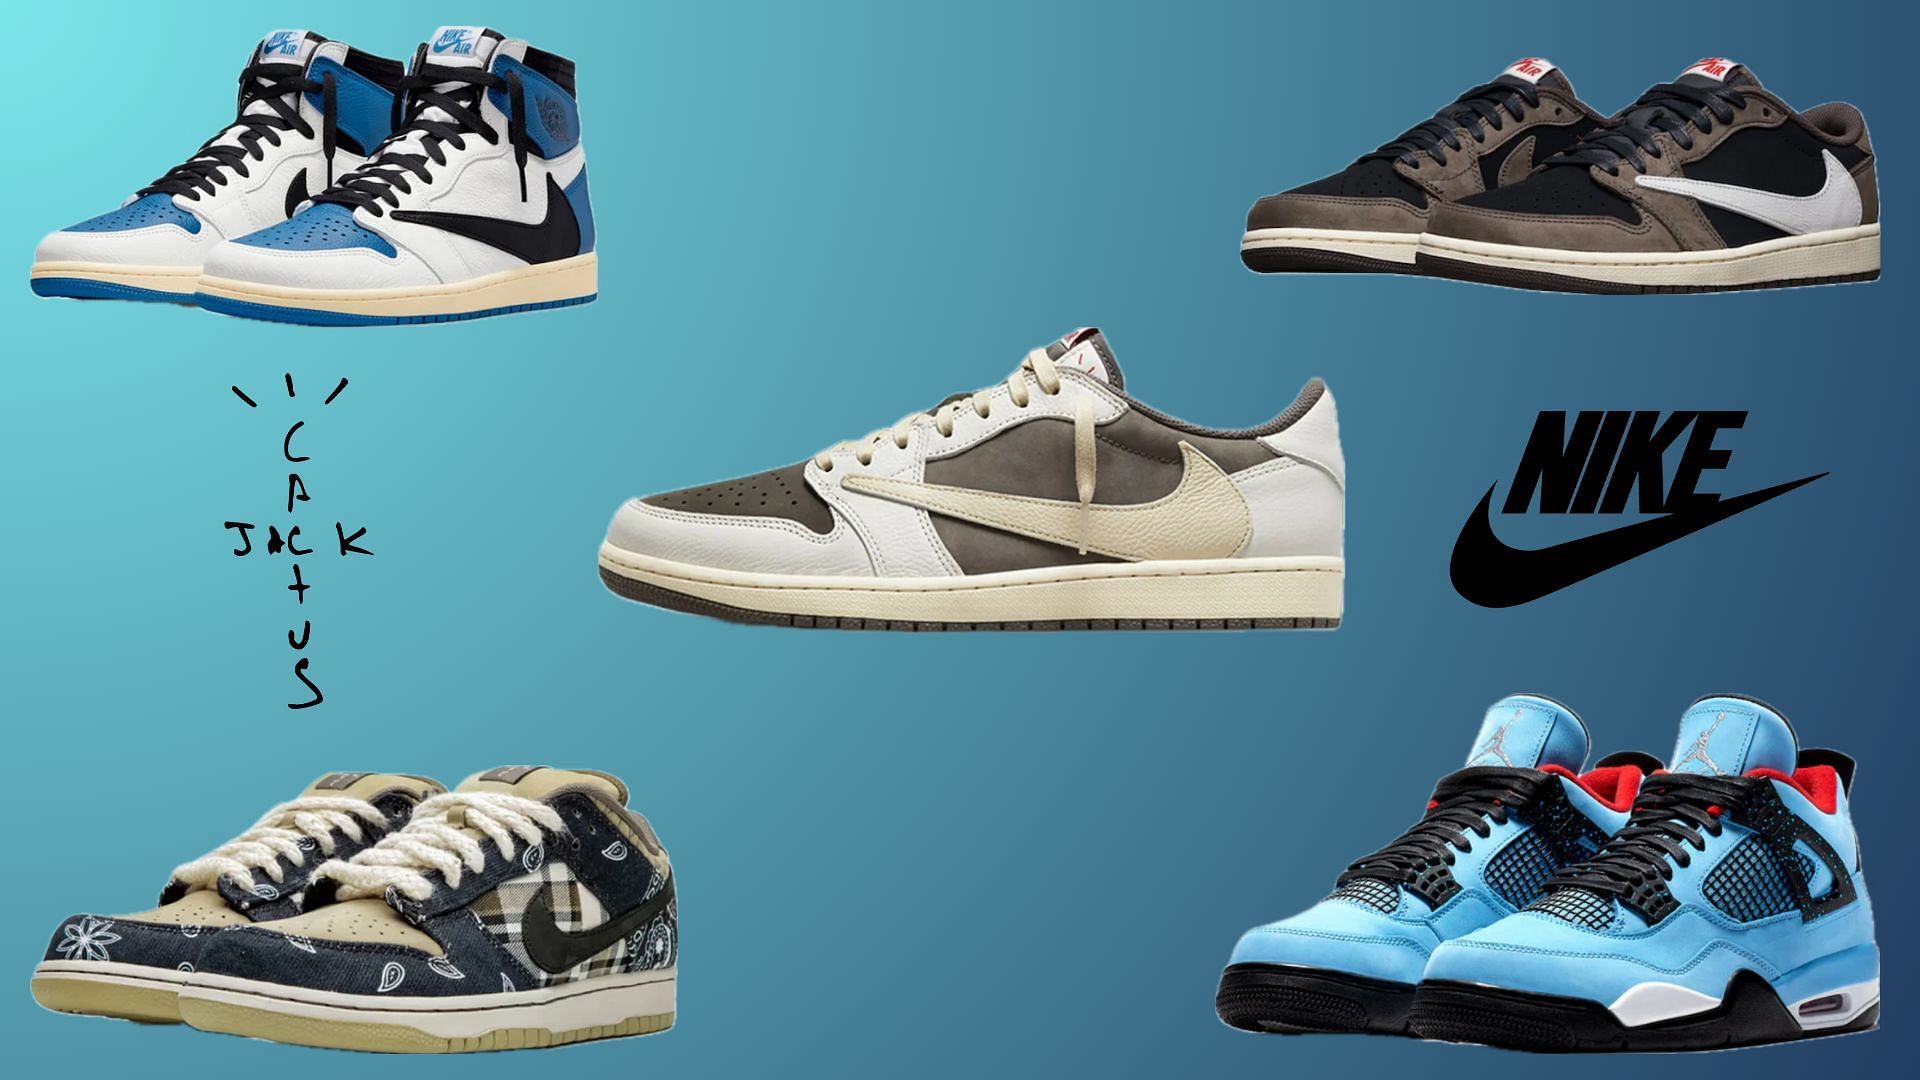 The Most Valuable Travis Scott x Nike Releases